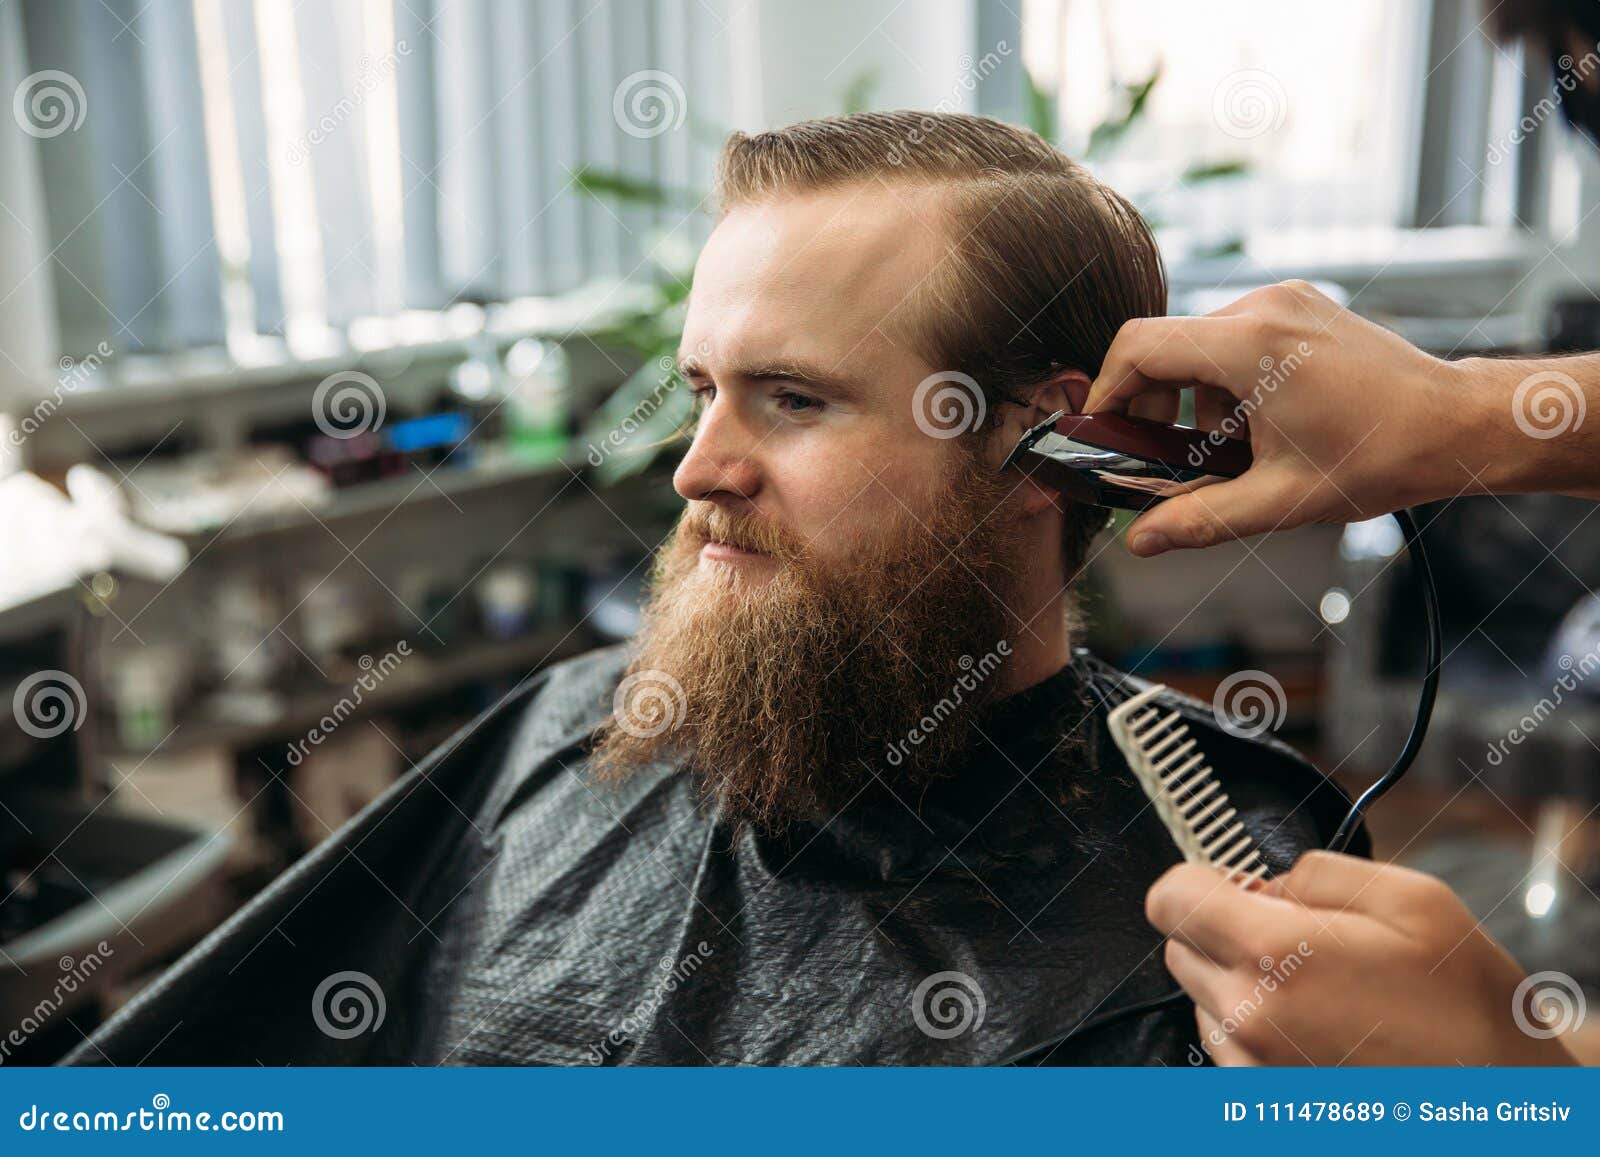 Bearded Man Having a Haircut with a Hair Clippers Stock Image - Image ...